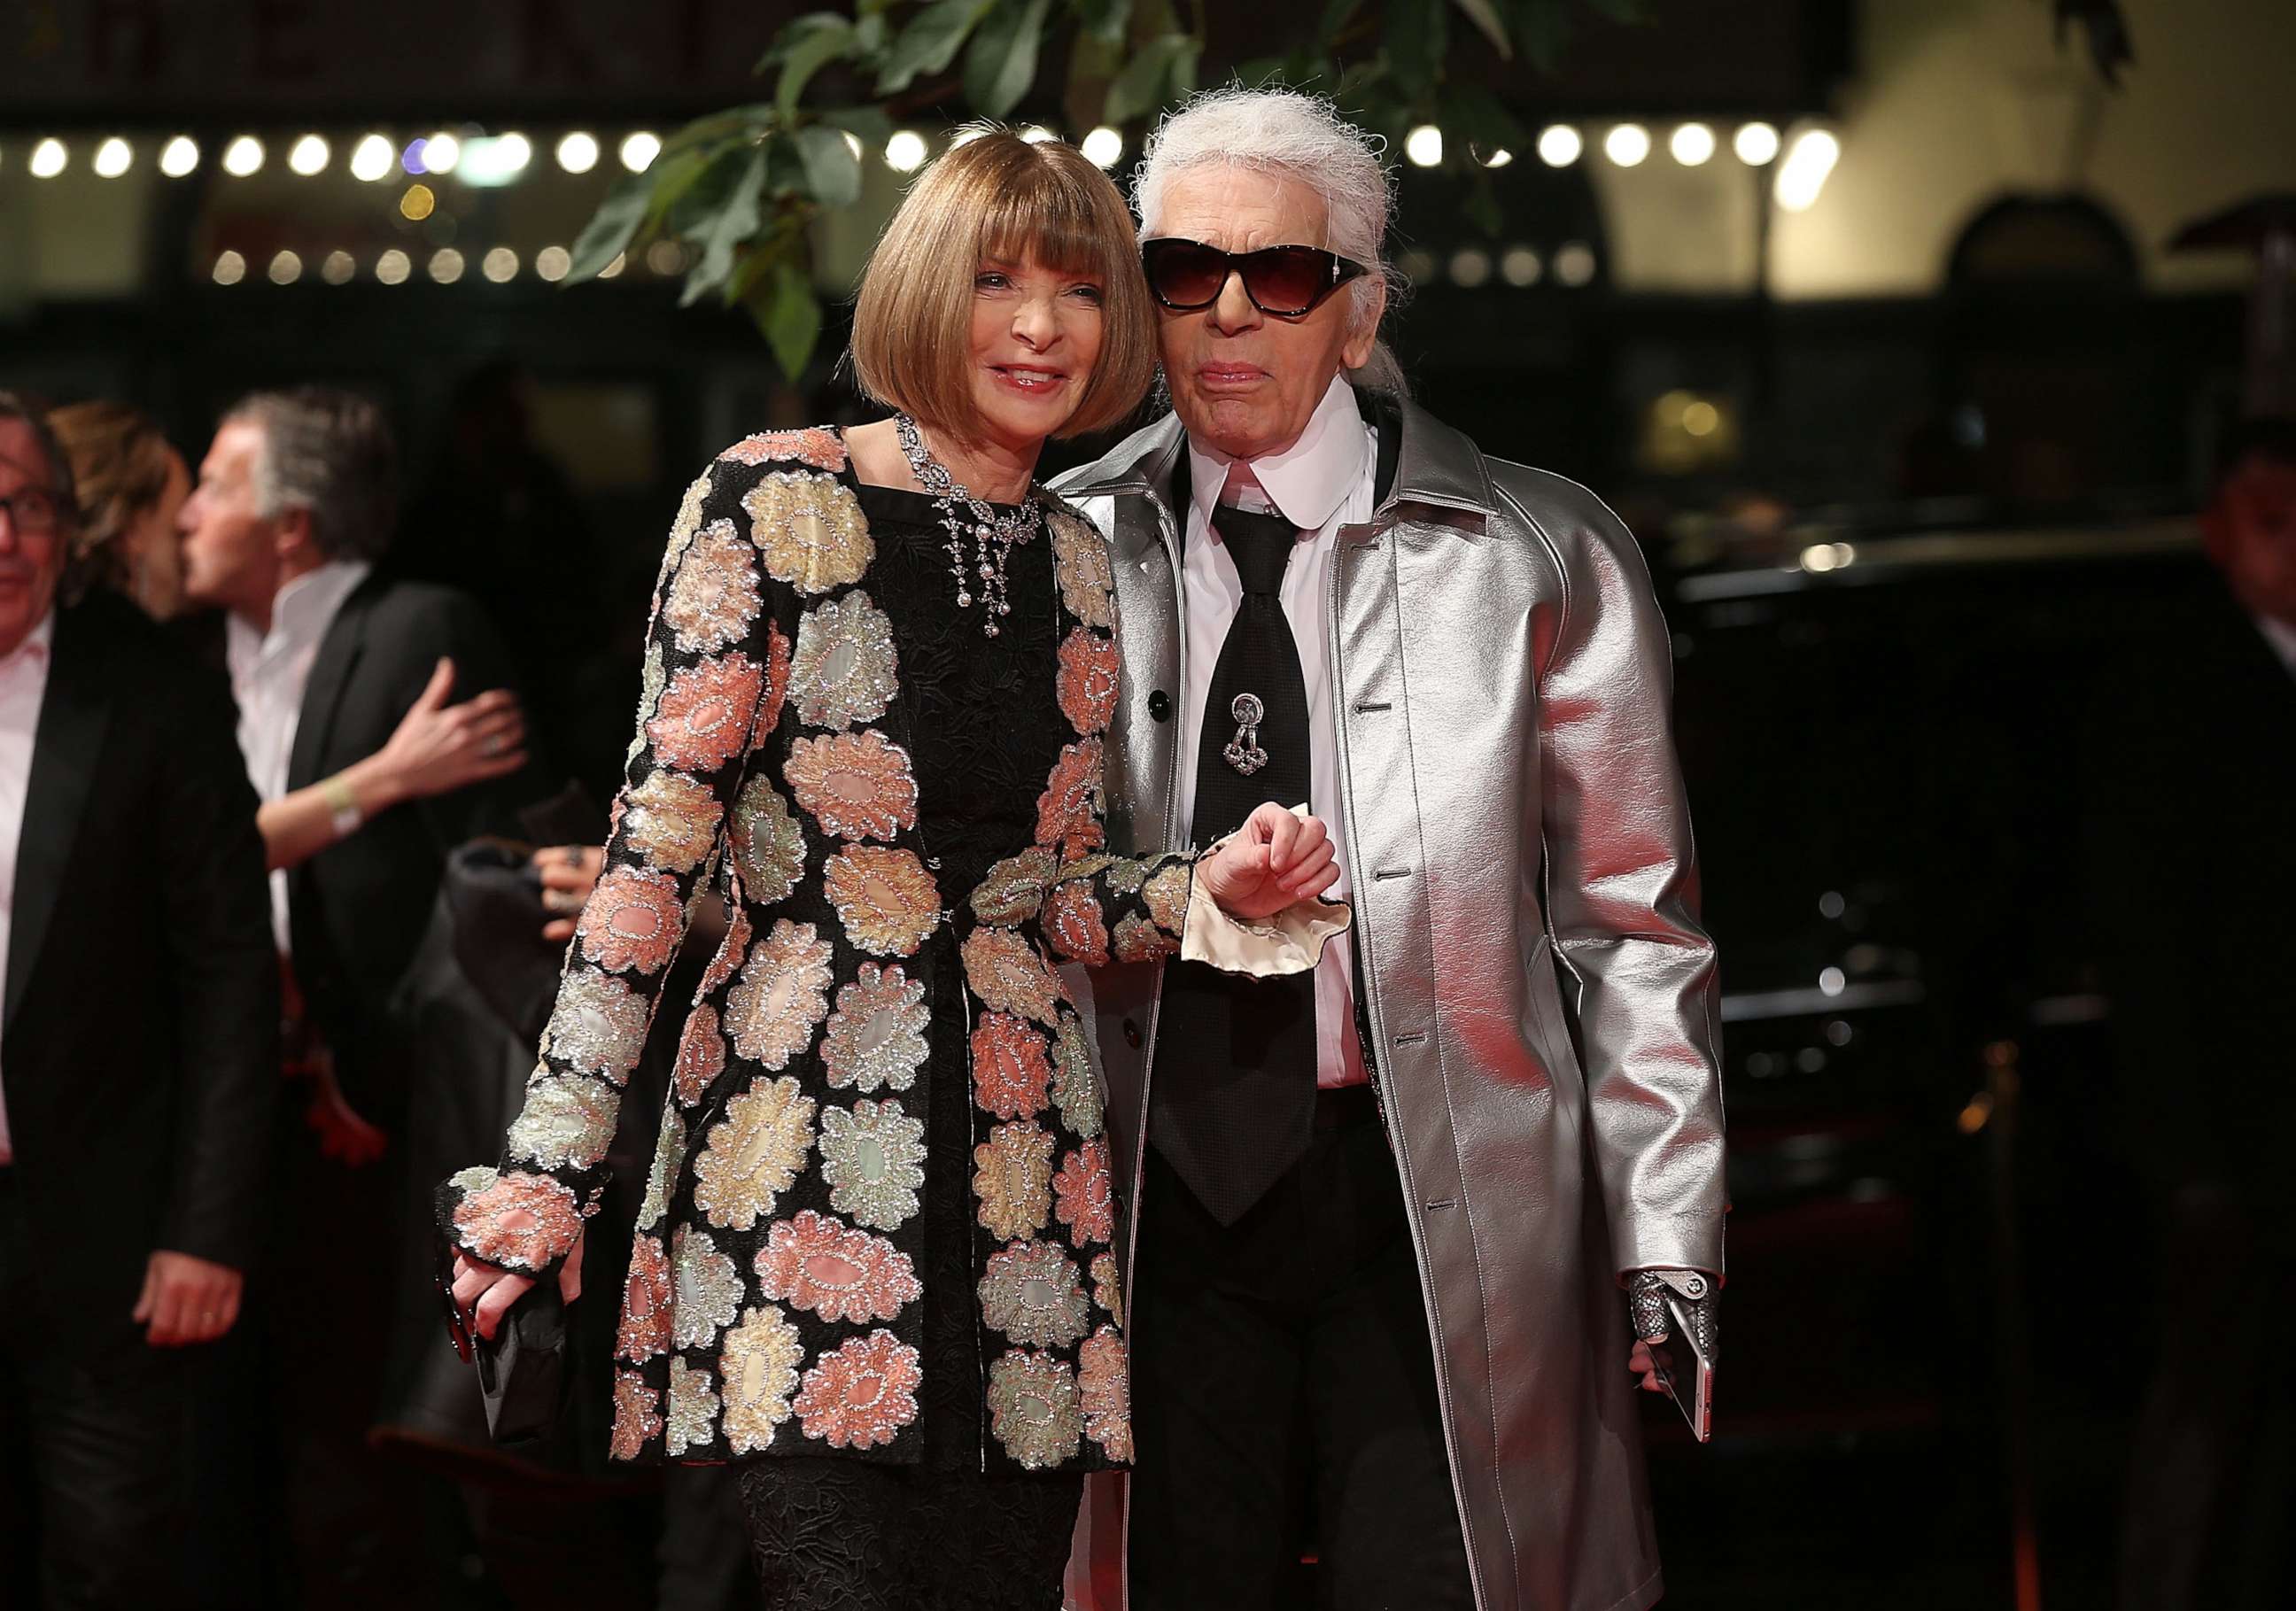 PHOTO: Anna Wintour and Karl Lagerfeld attend the British Fashion Awards 2015 at London Coliseum, Nov. 23, 2015, in London.